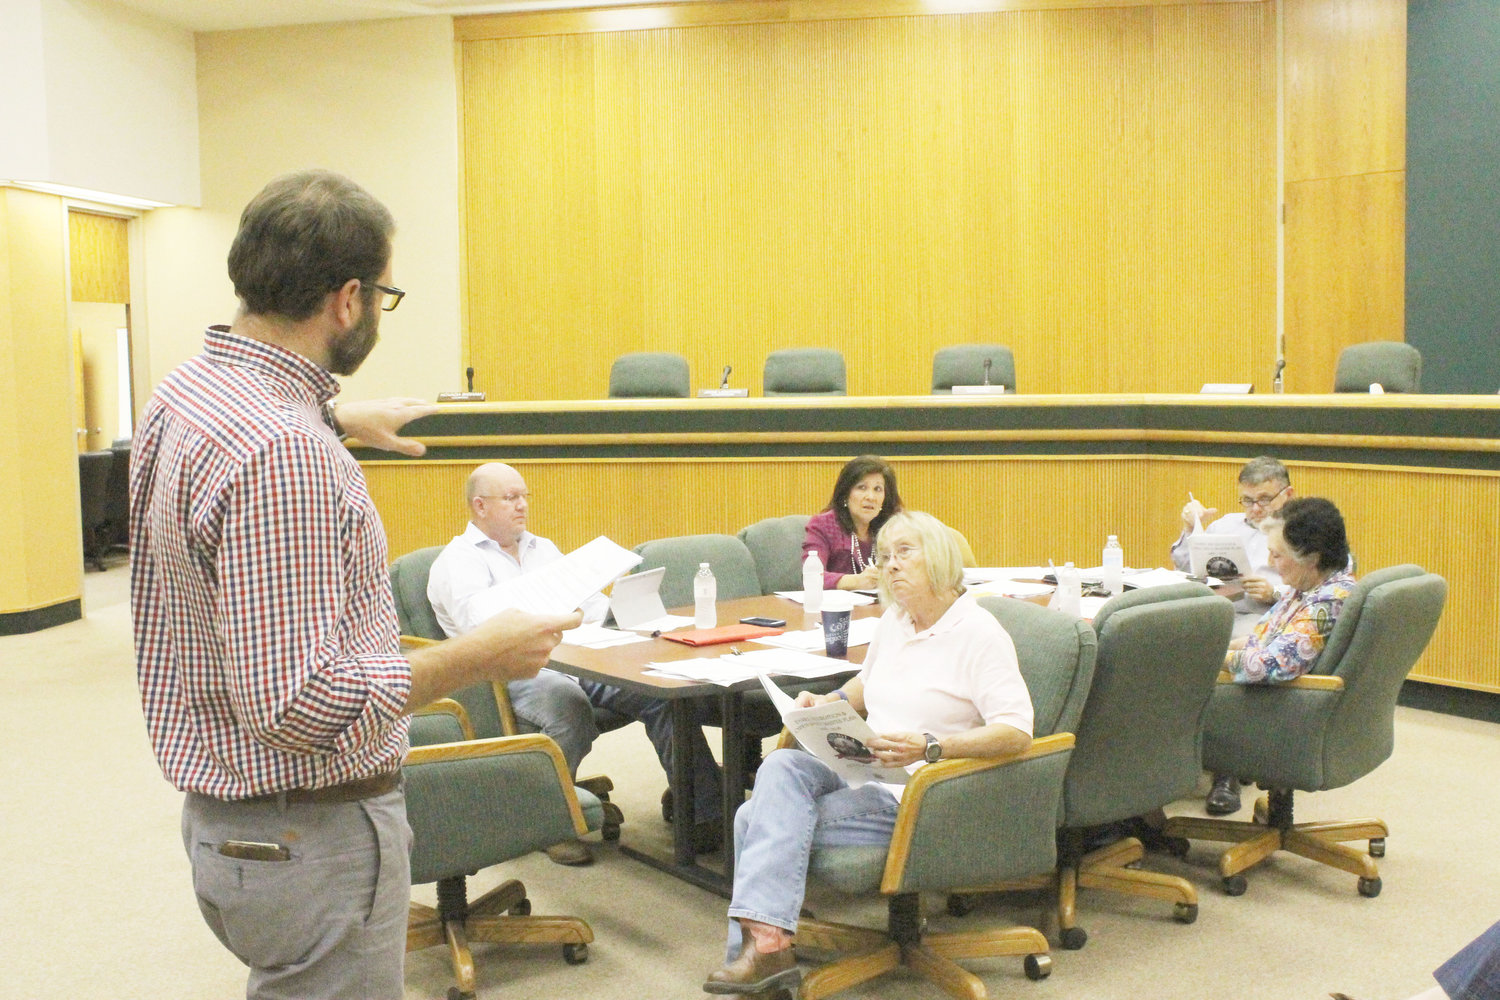 Hunter Rush of MHS Planning & Design, LLC, went over the highlights of the Parks and Open Spaces Master Plan at the Mineola City Council workshop Thursday. Listening at the council table were Kevin White, alderman  Ward 2; City Administrator Mercy Rushing; Mayor Rodney Watkins; Sue Jones, councilperson Ward 1 and Jayne Lankford, Ward 2, councilperson.